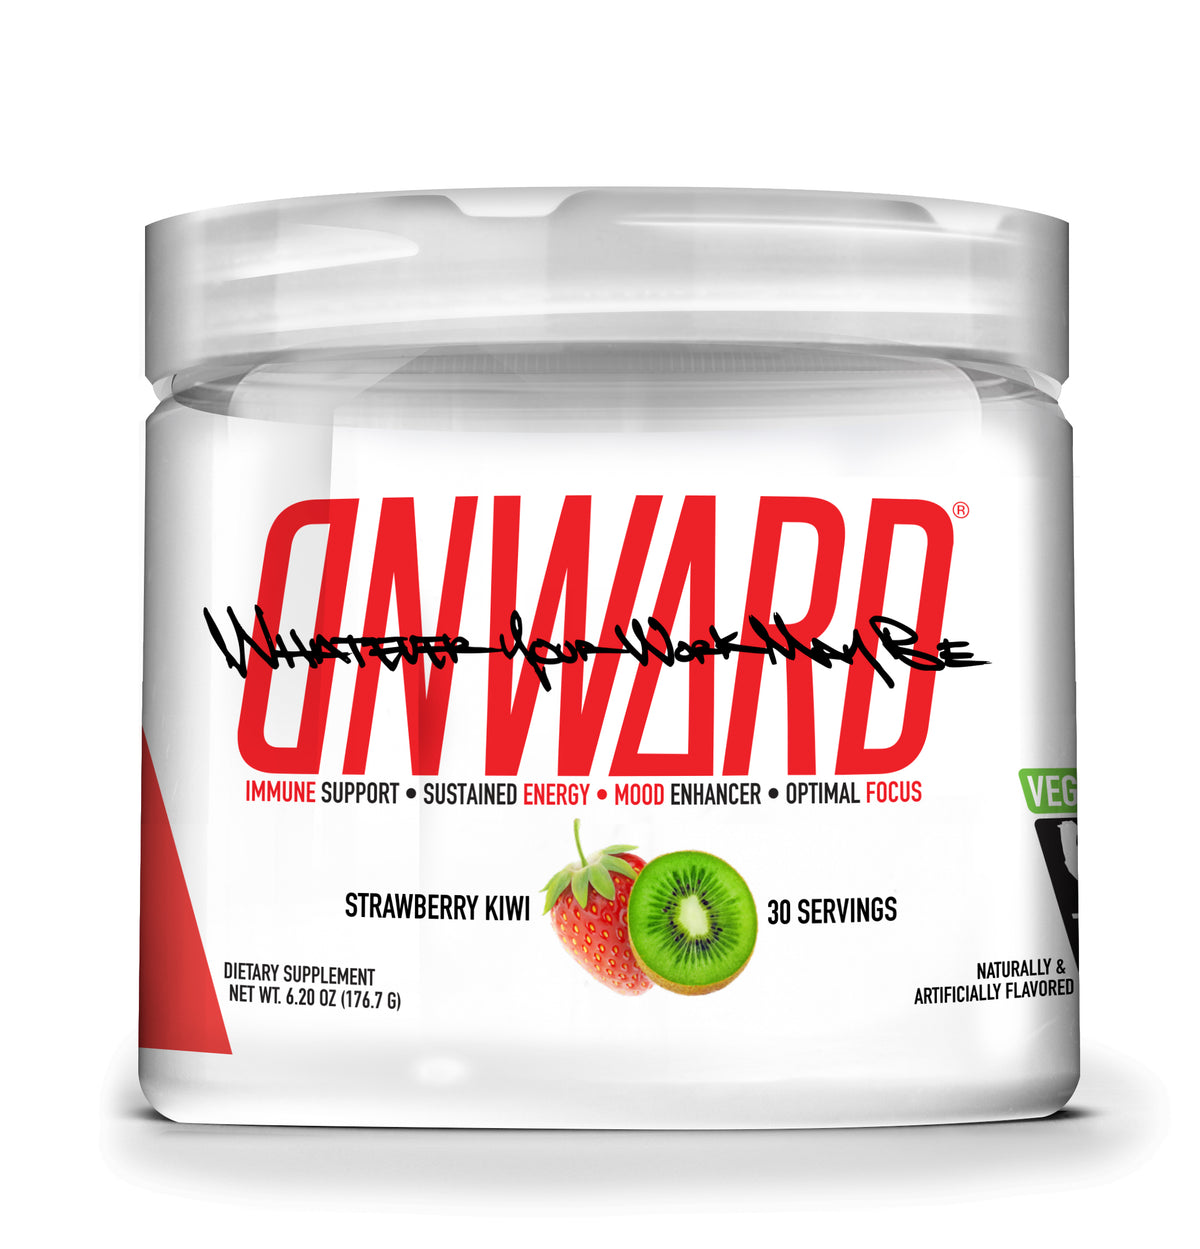 Photo of Onward Strawberry Kiwi flavor. The container is clear plastic with a clear plastic lid. Onward logo in red with &quot;Whatever your work may be&quot; in black interceding the Onward logo. There is a strawberry and kiwi on the packaging.